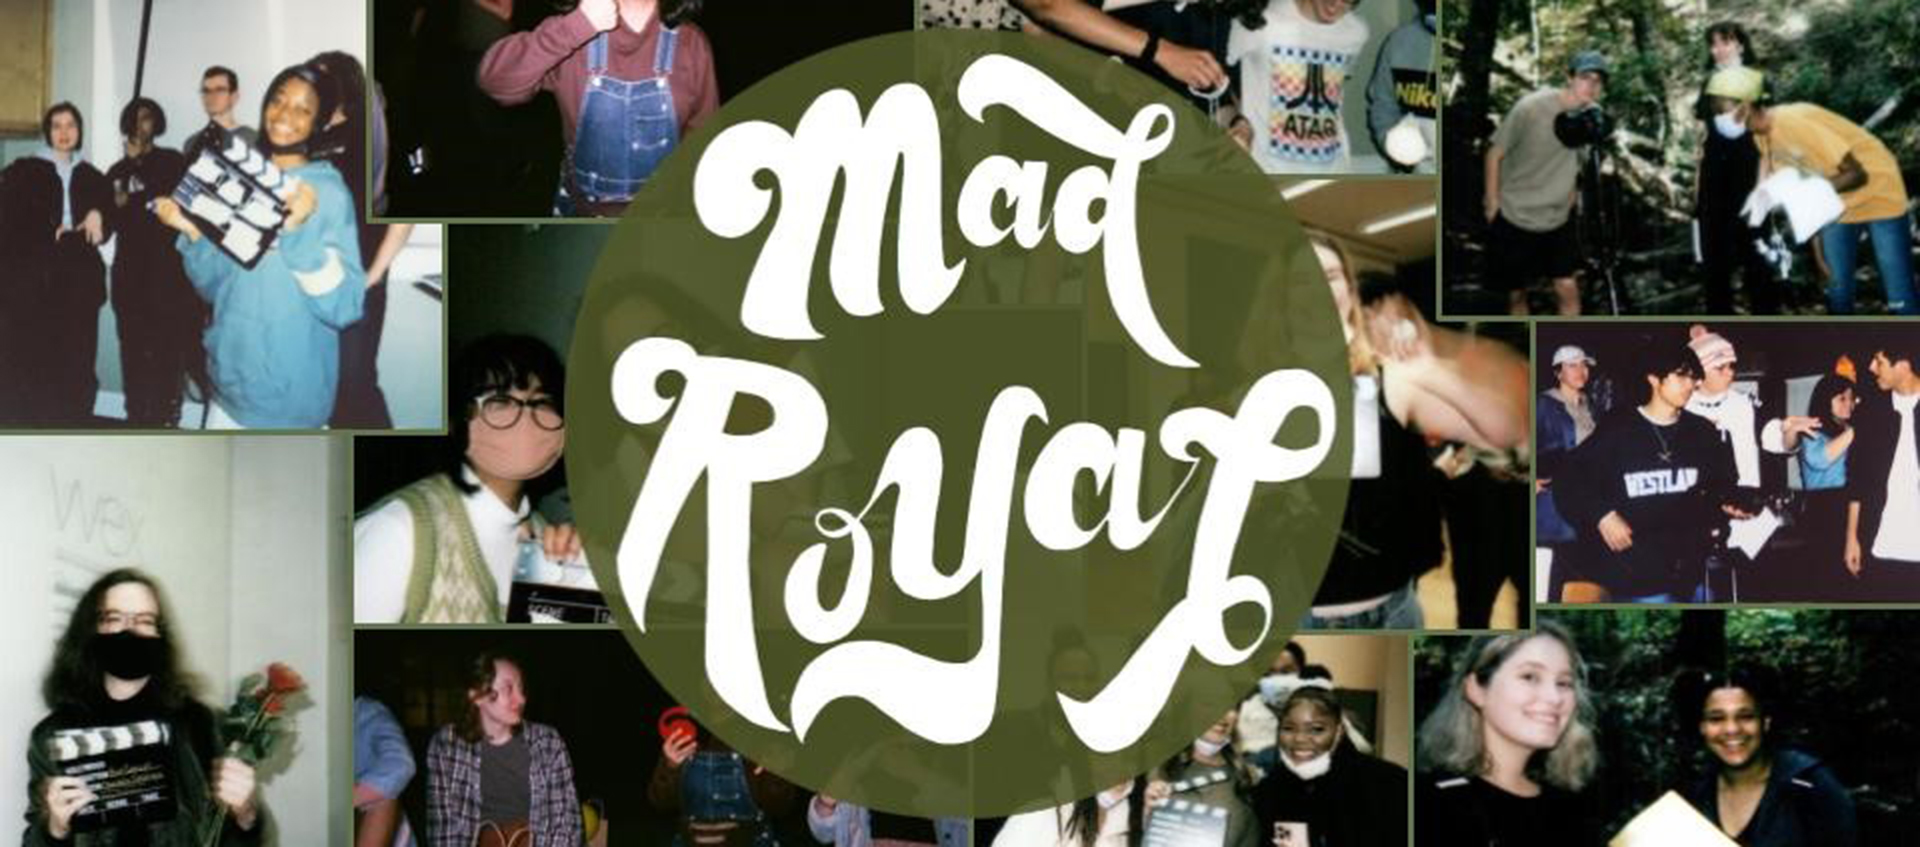 A grid-like collage of different photos of young people making movies. Some are holding filmmaking gear, others are smiling to the camera. A slightly transparent olive green circle with the words “Mad Royal” in the center is superimposed over this collage.